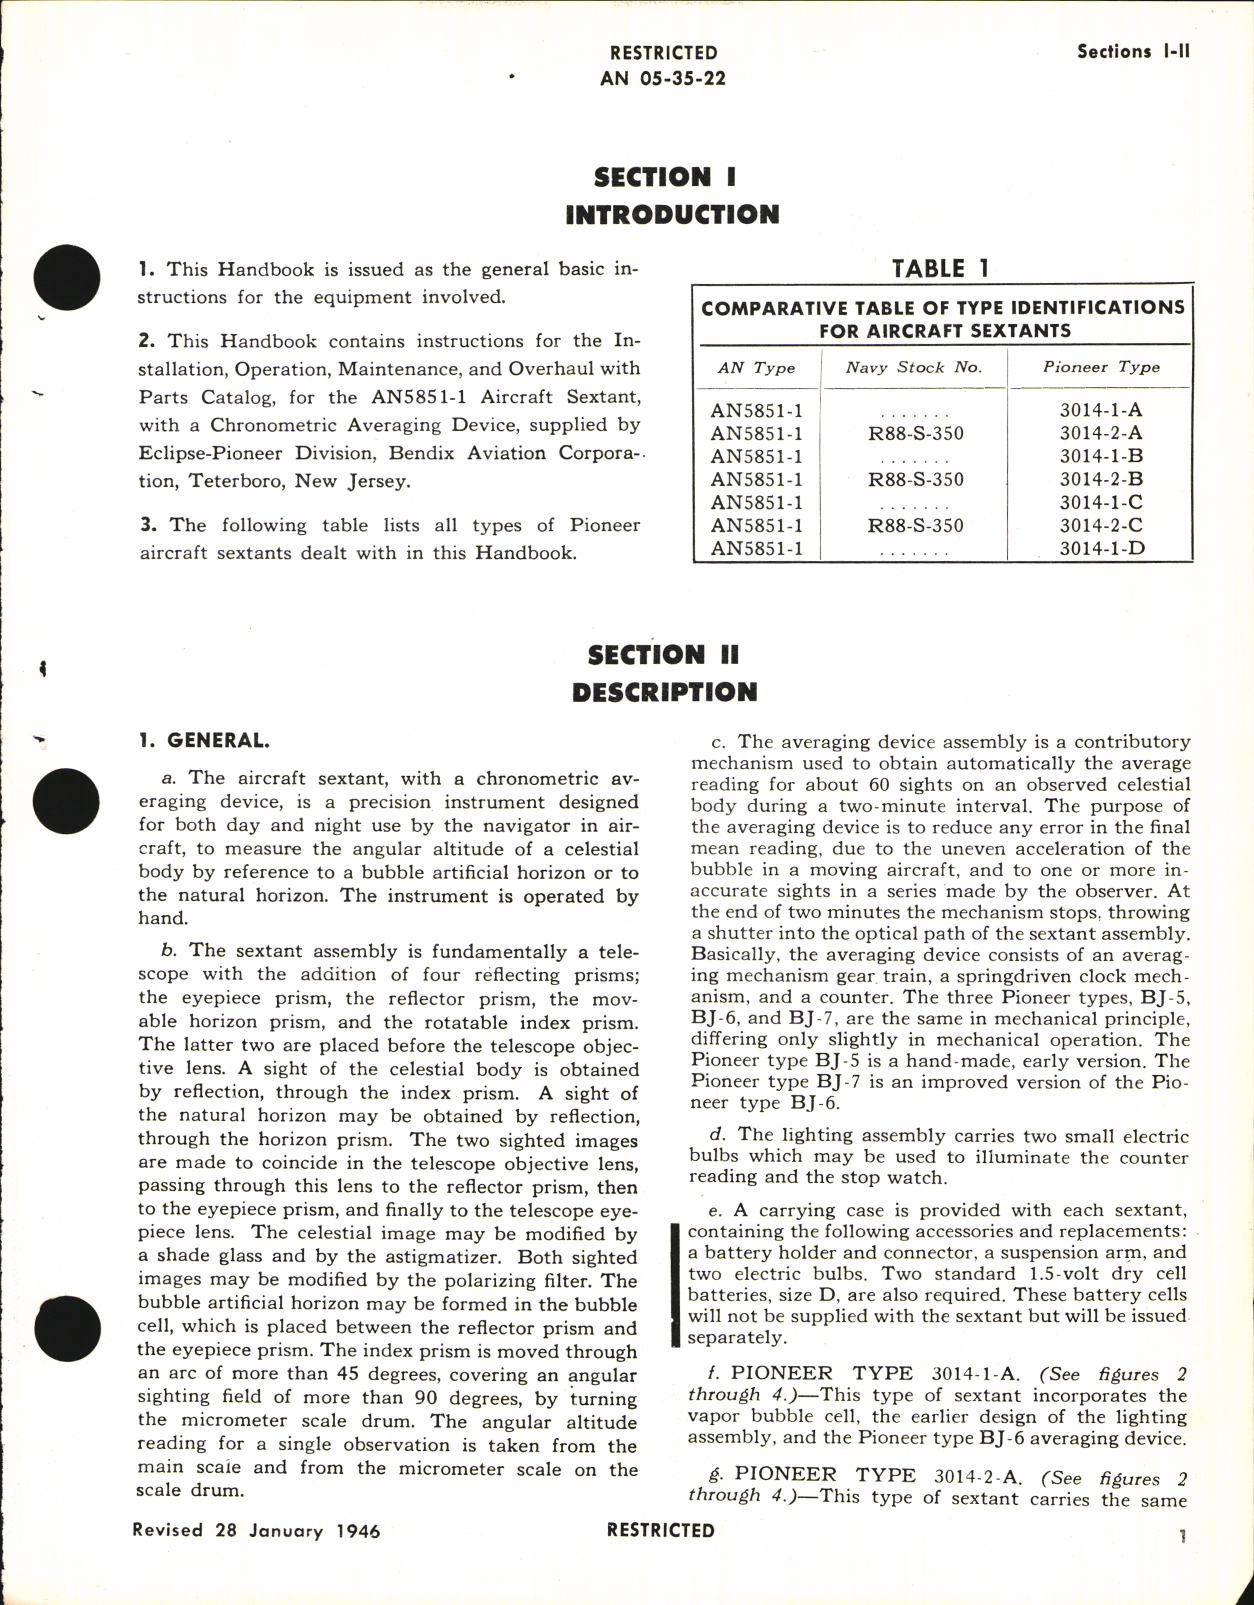 Sample page 5 from AirCorps Library document: Operation, Service, & Overhaul Instructions with Parts Catalog for Aircraft Sextant Type AN 5851-1